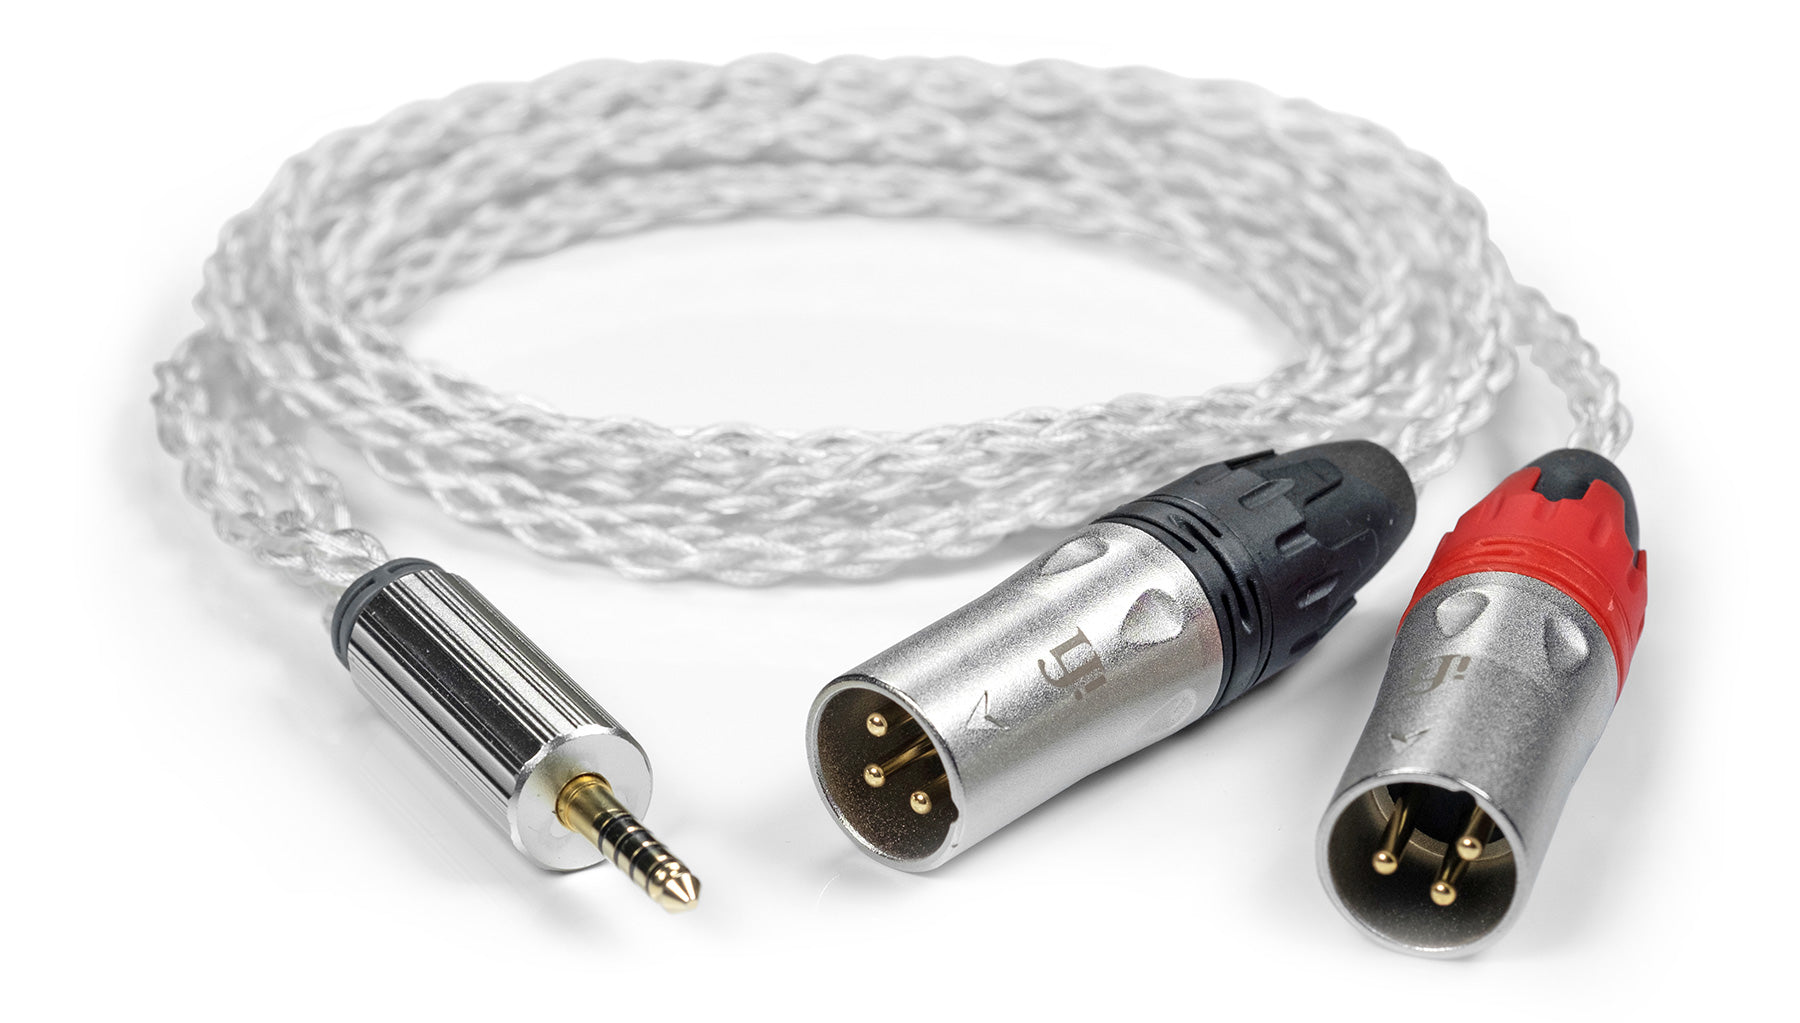 iFi Audio 4.4 mm to XLR Cable | Free shipping within Canada - Art et Son (Art and Sound)